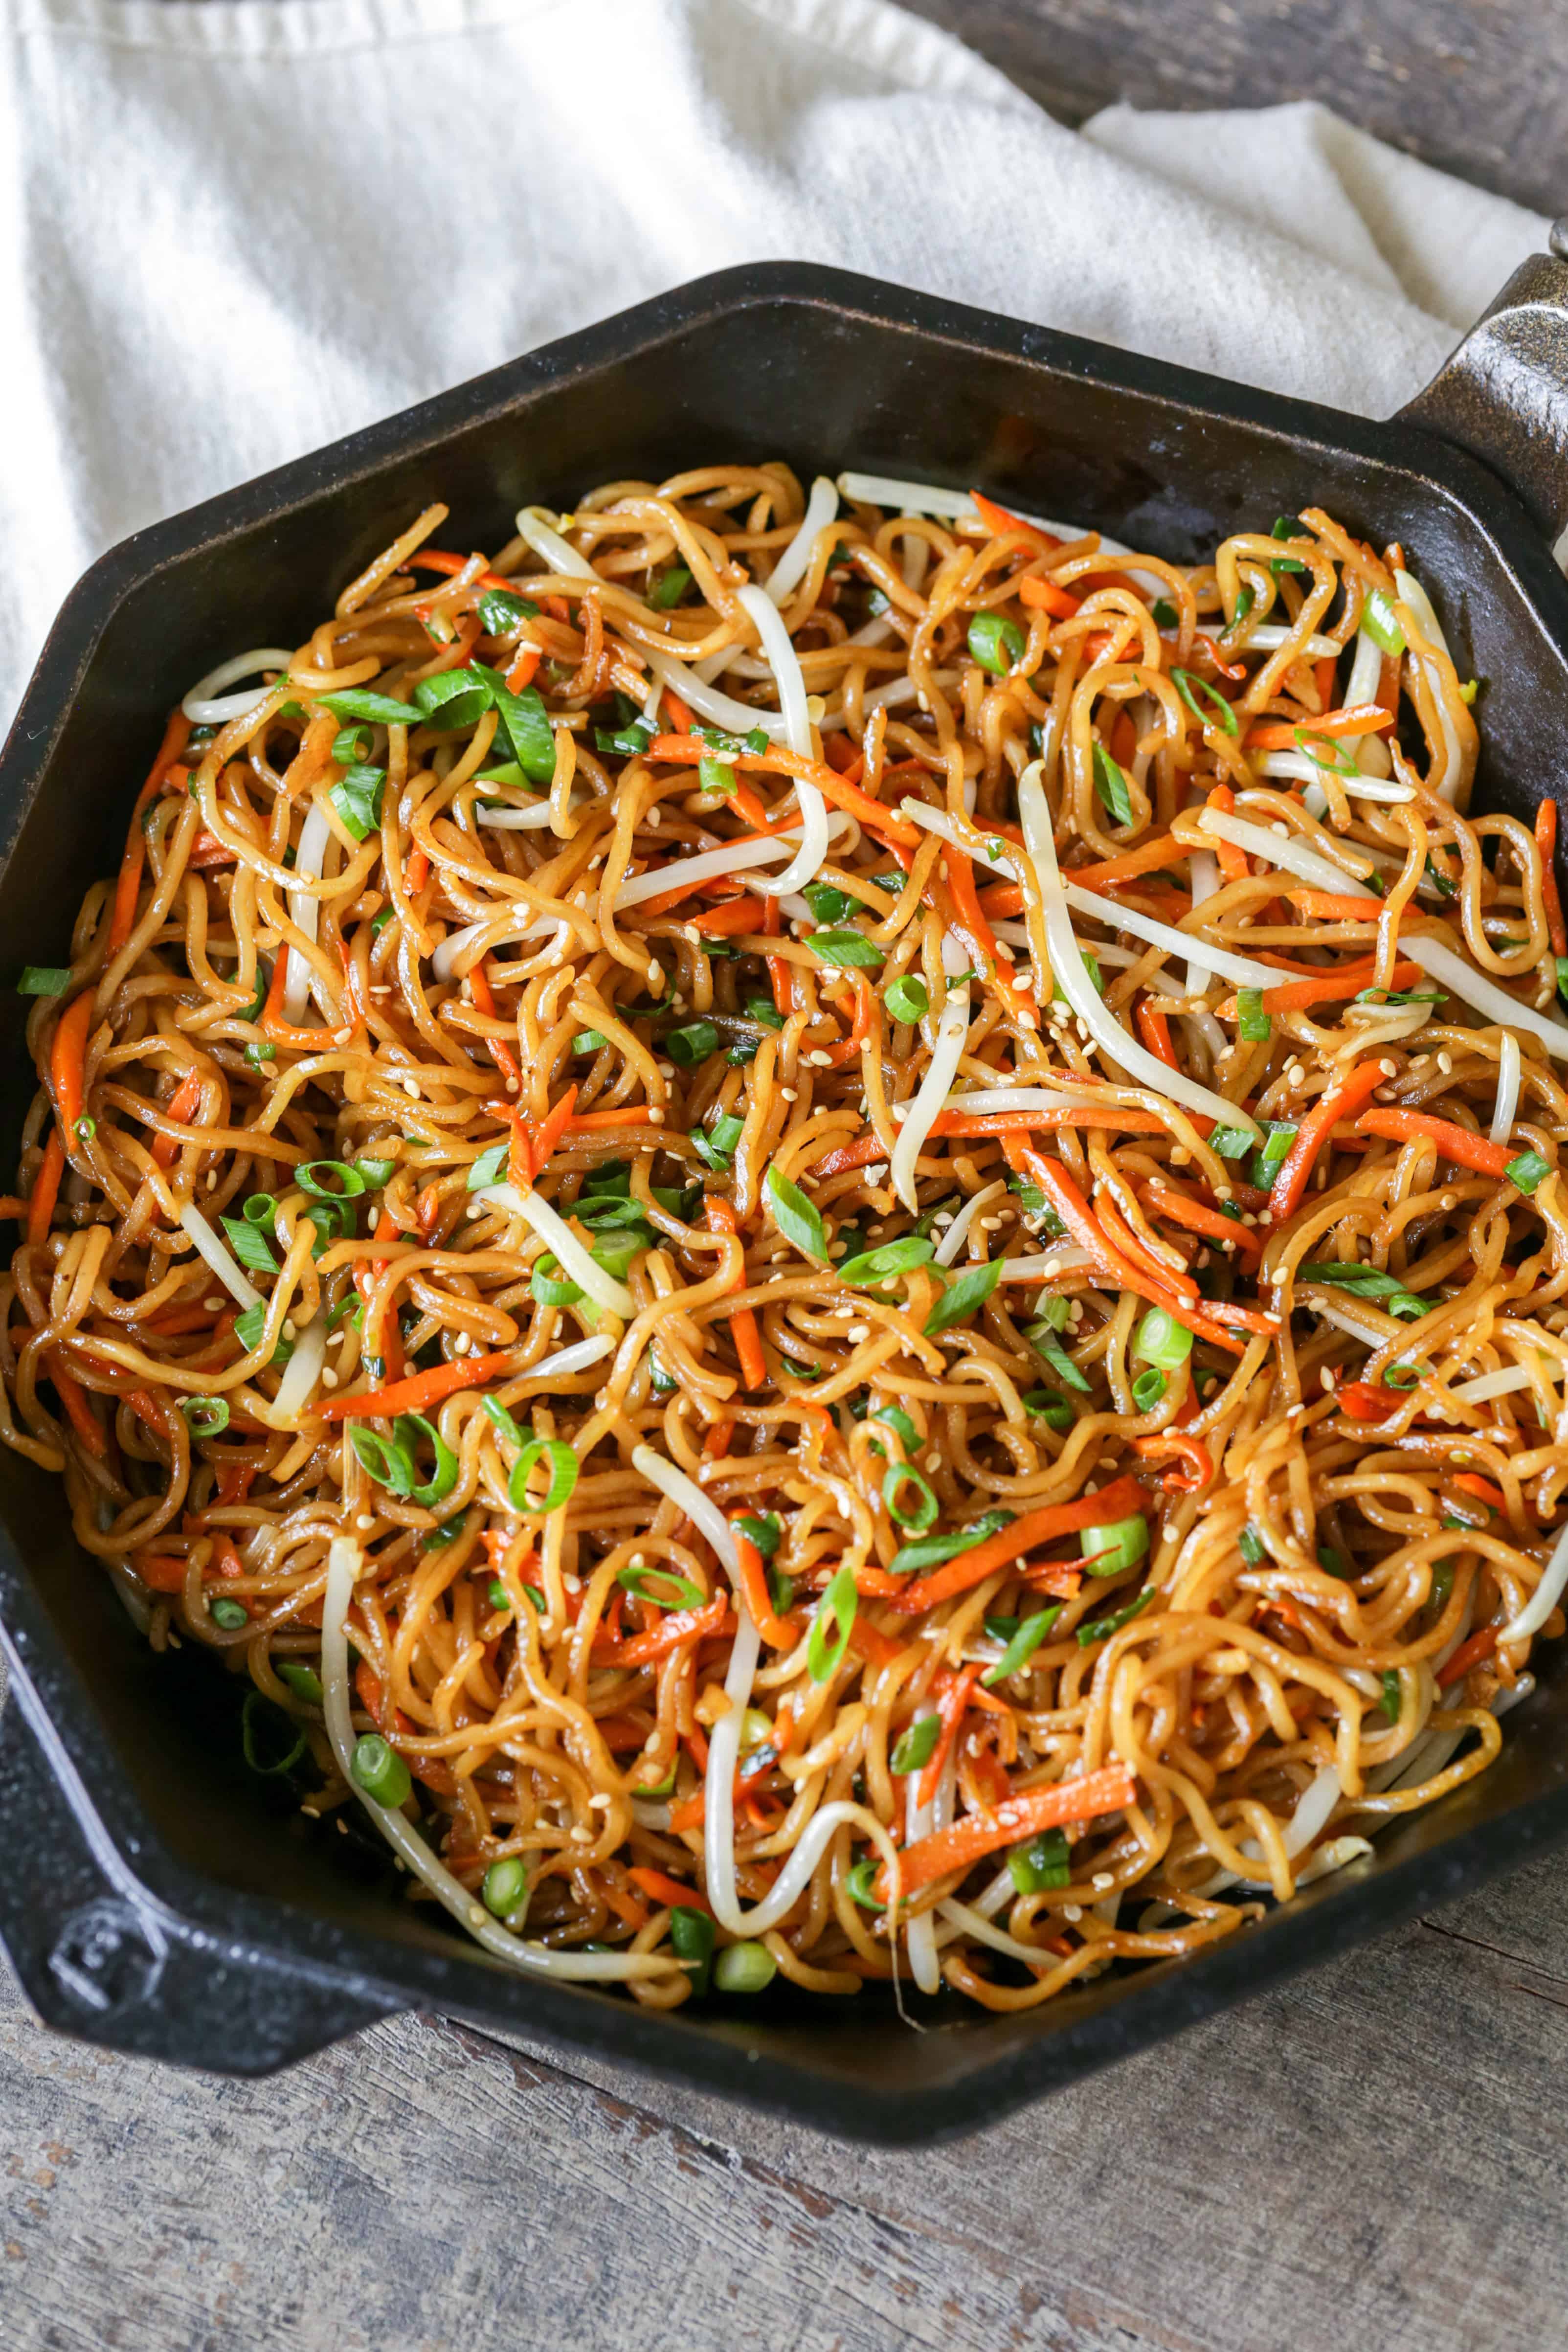 Pan Fried Noodles The Salty Marshmallow,Peanut Butter Puppy Chow Recipe